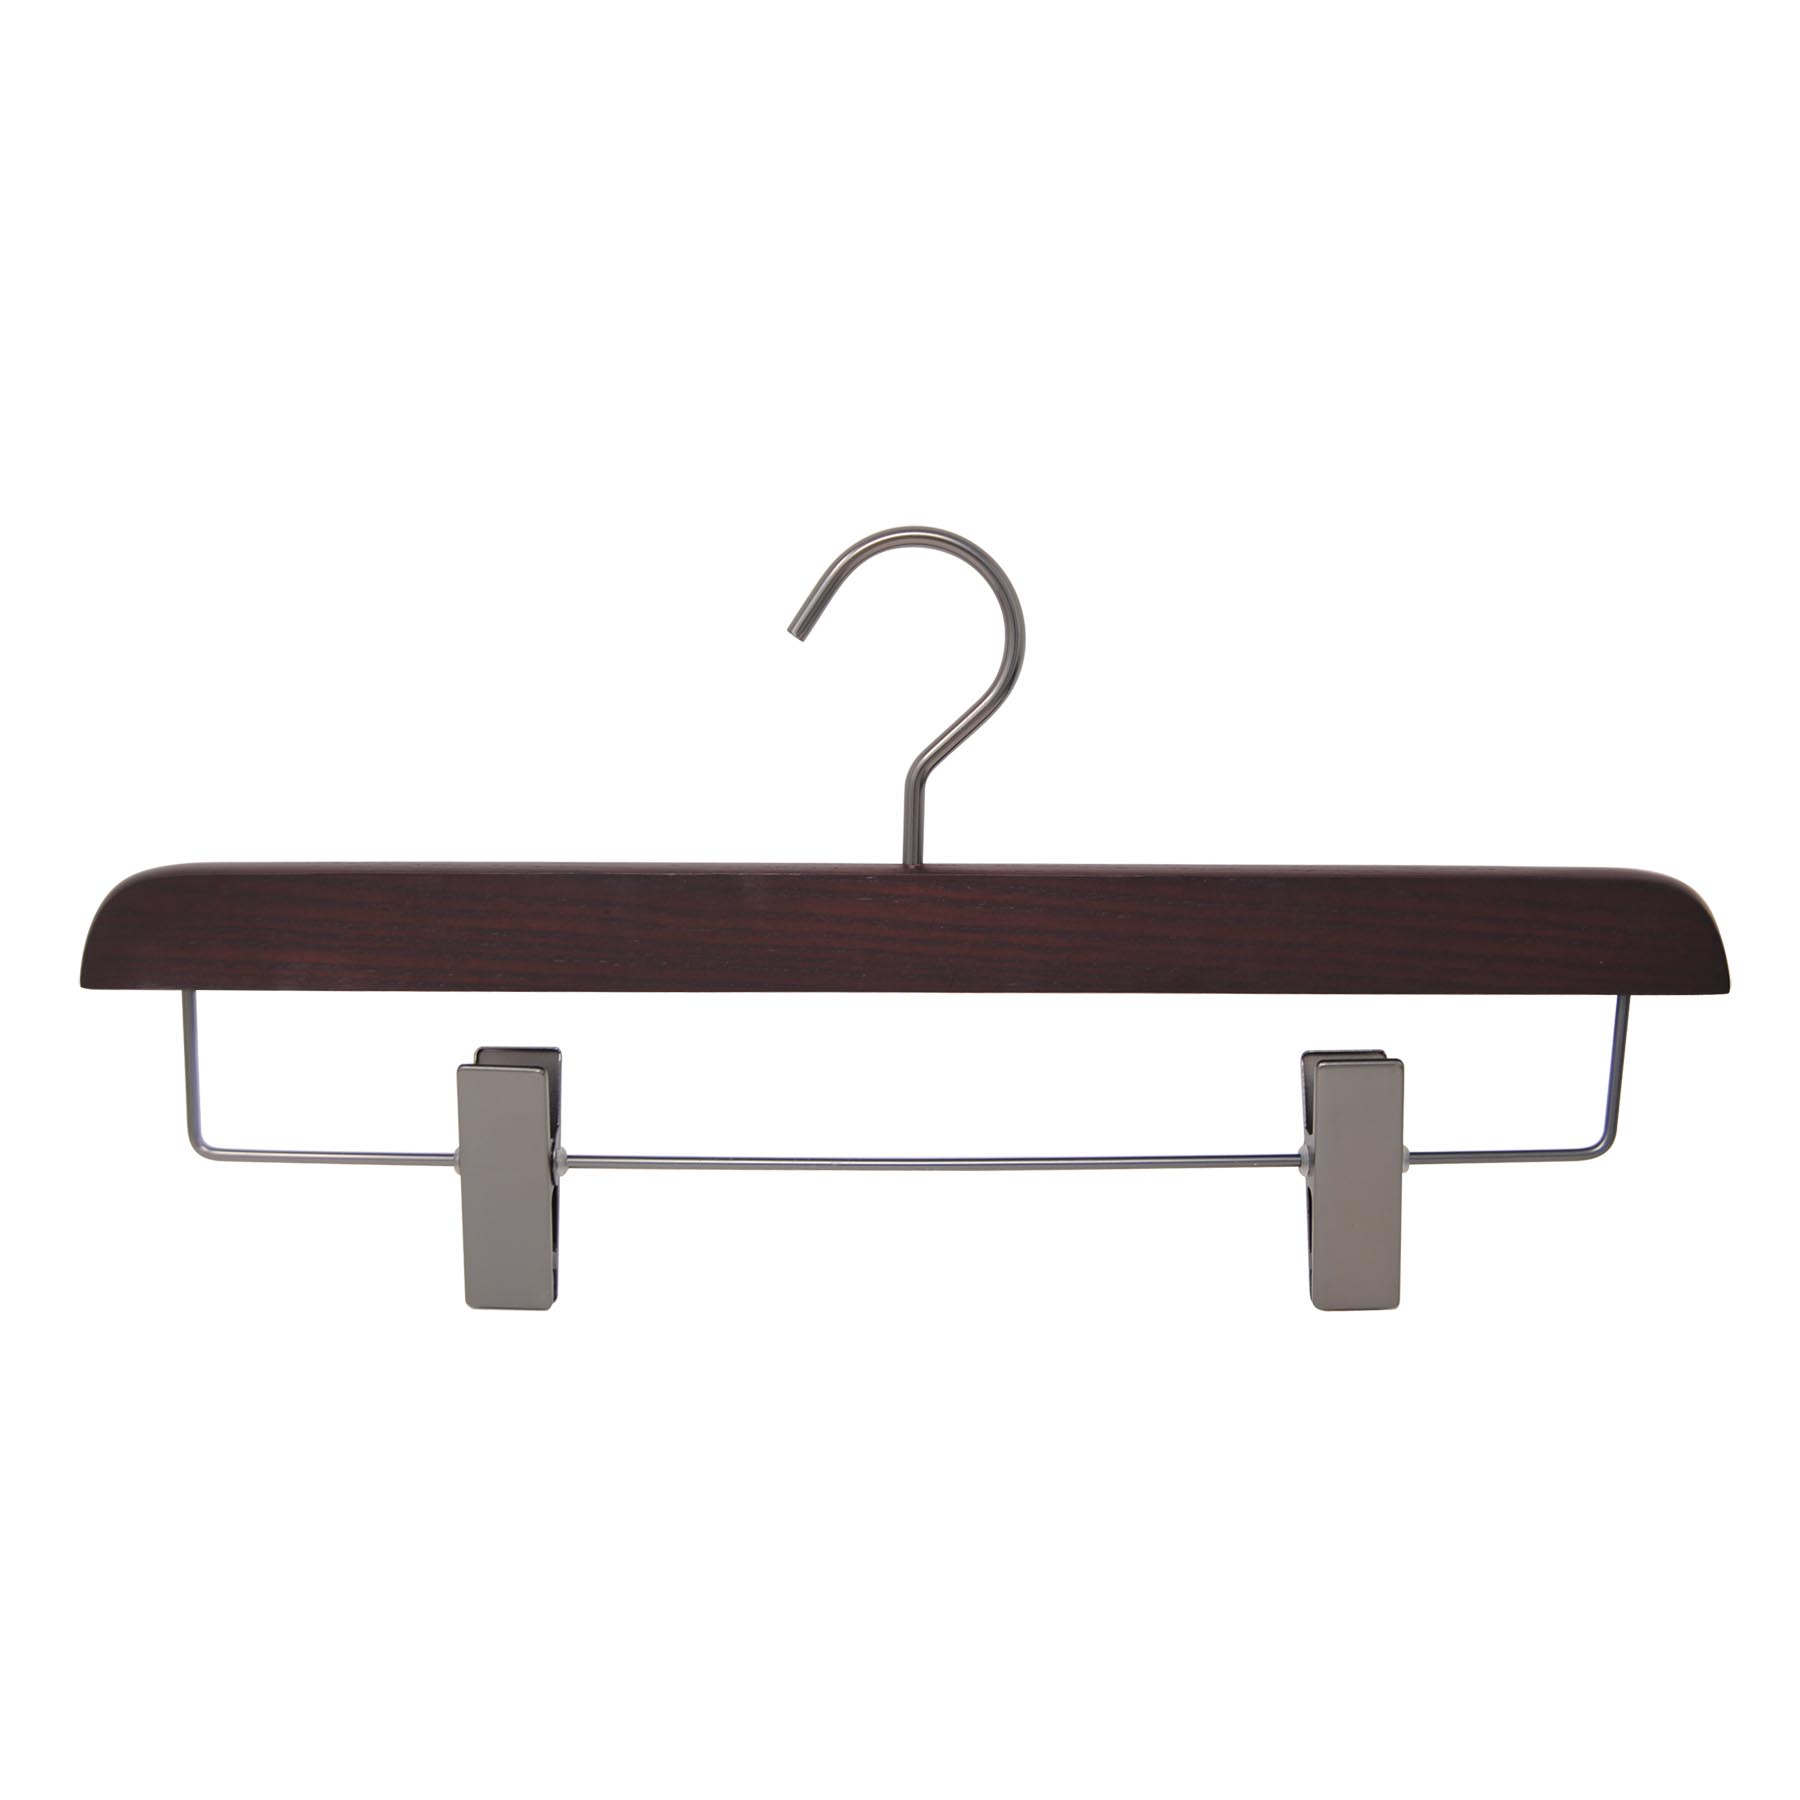 15 clips hangers for skirt and trousers - walnut color